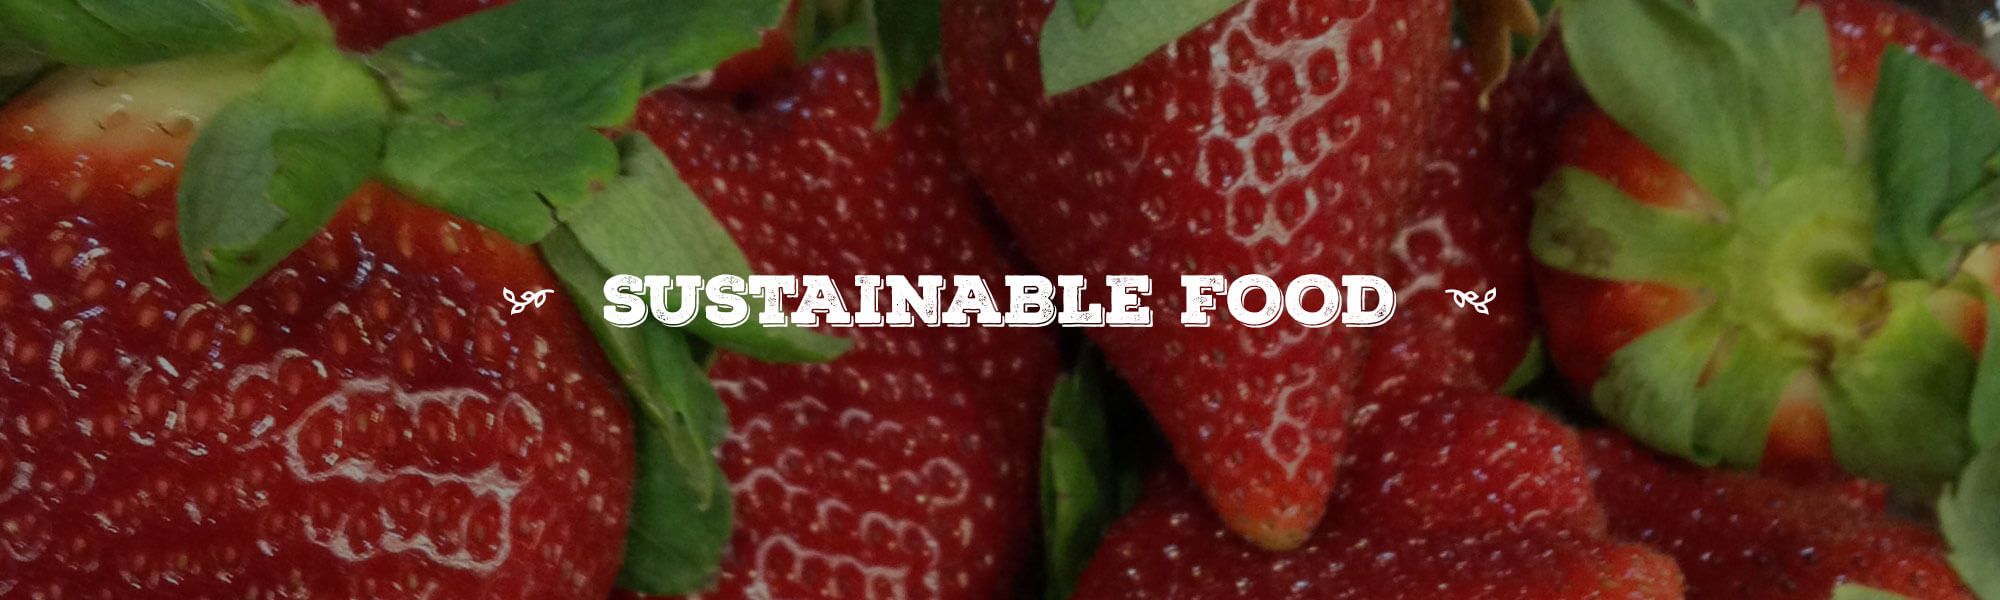 Sustainable Food overlay on close up photo of red strawberries